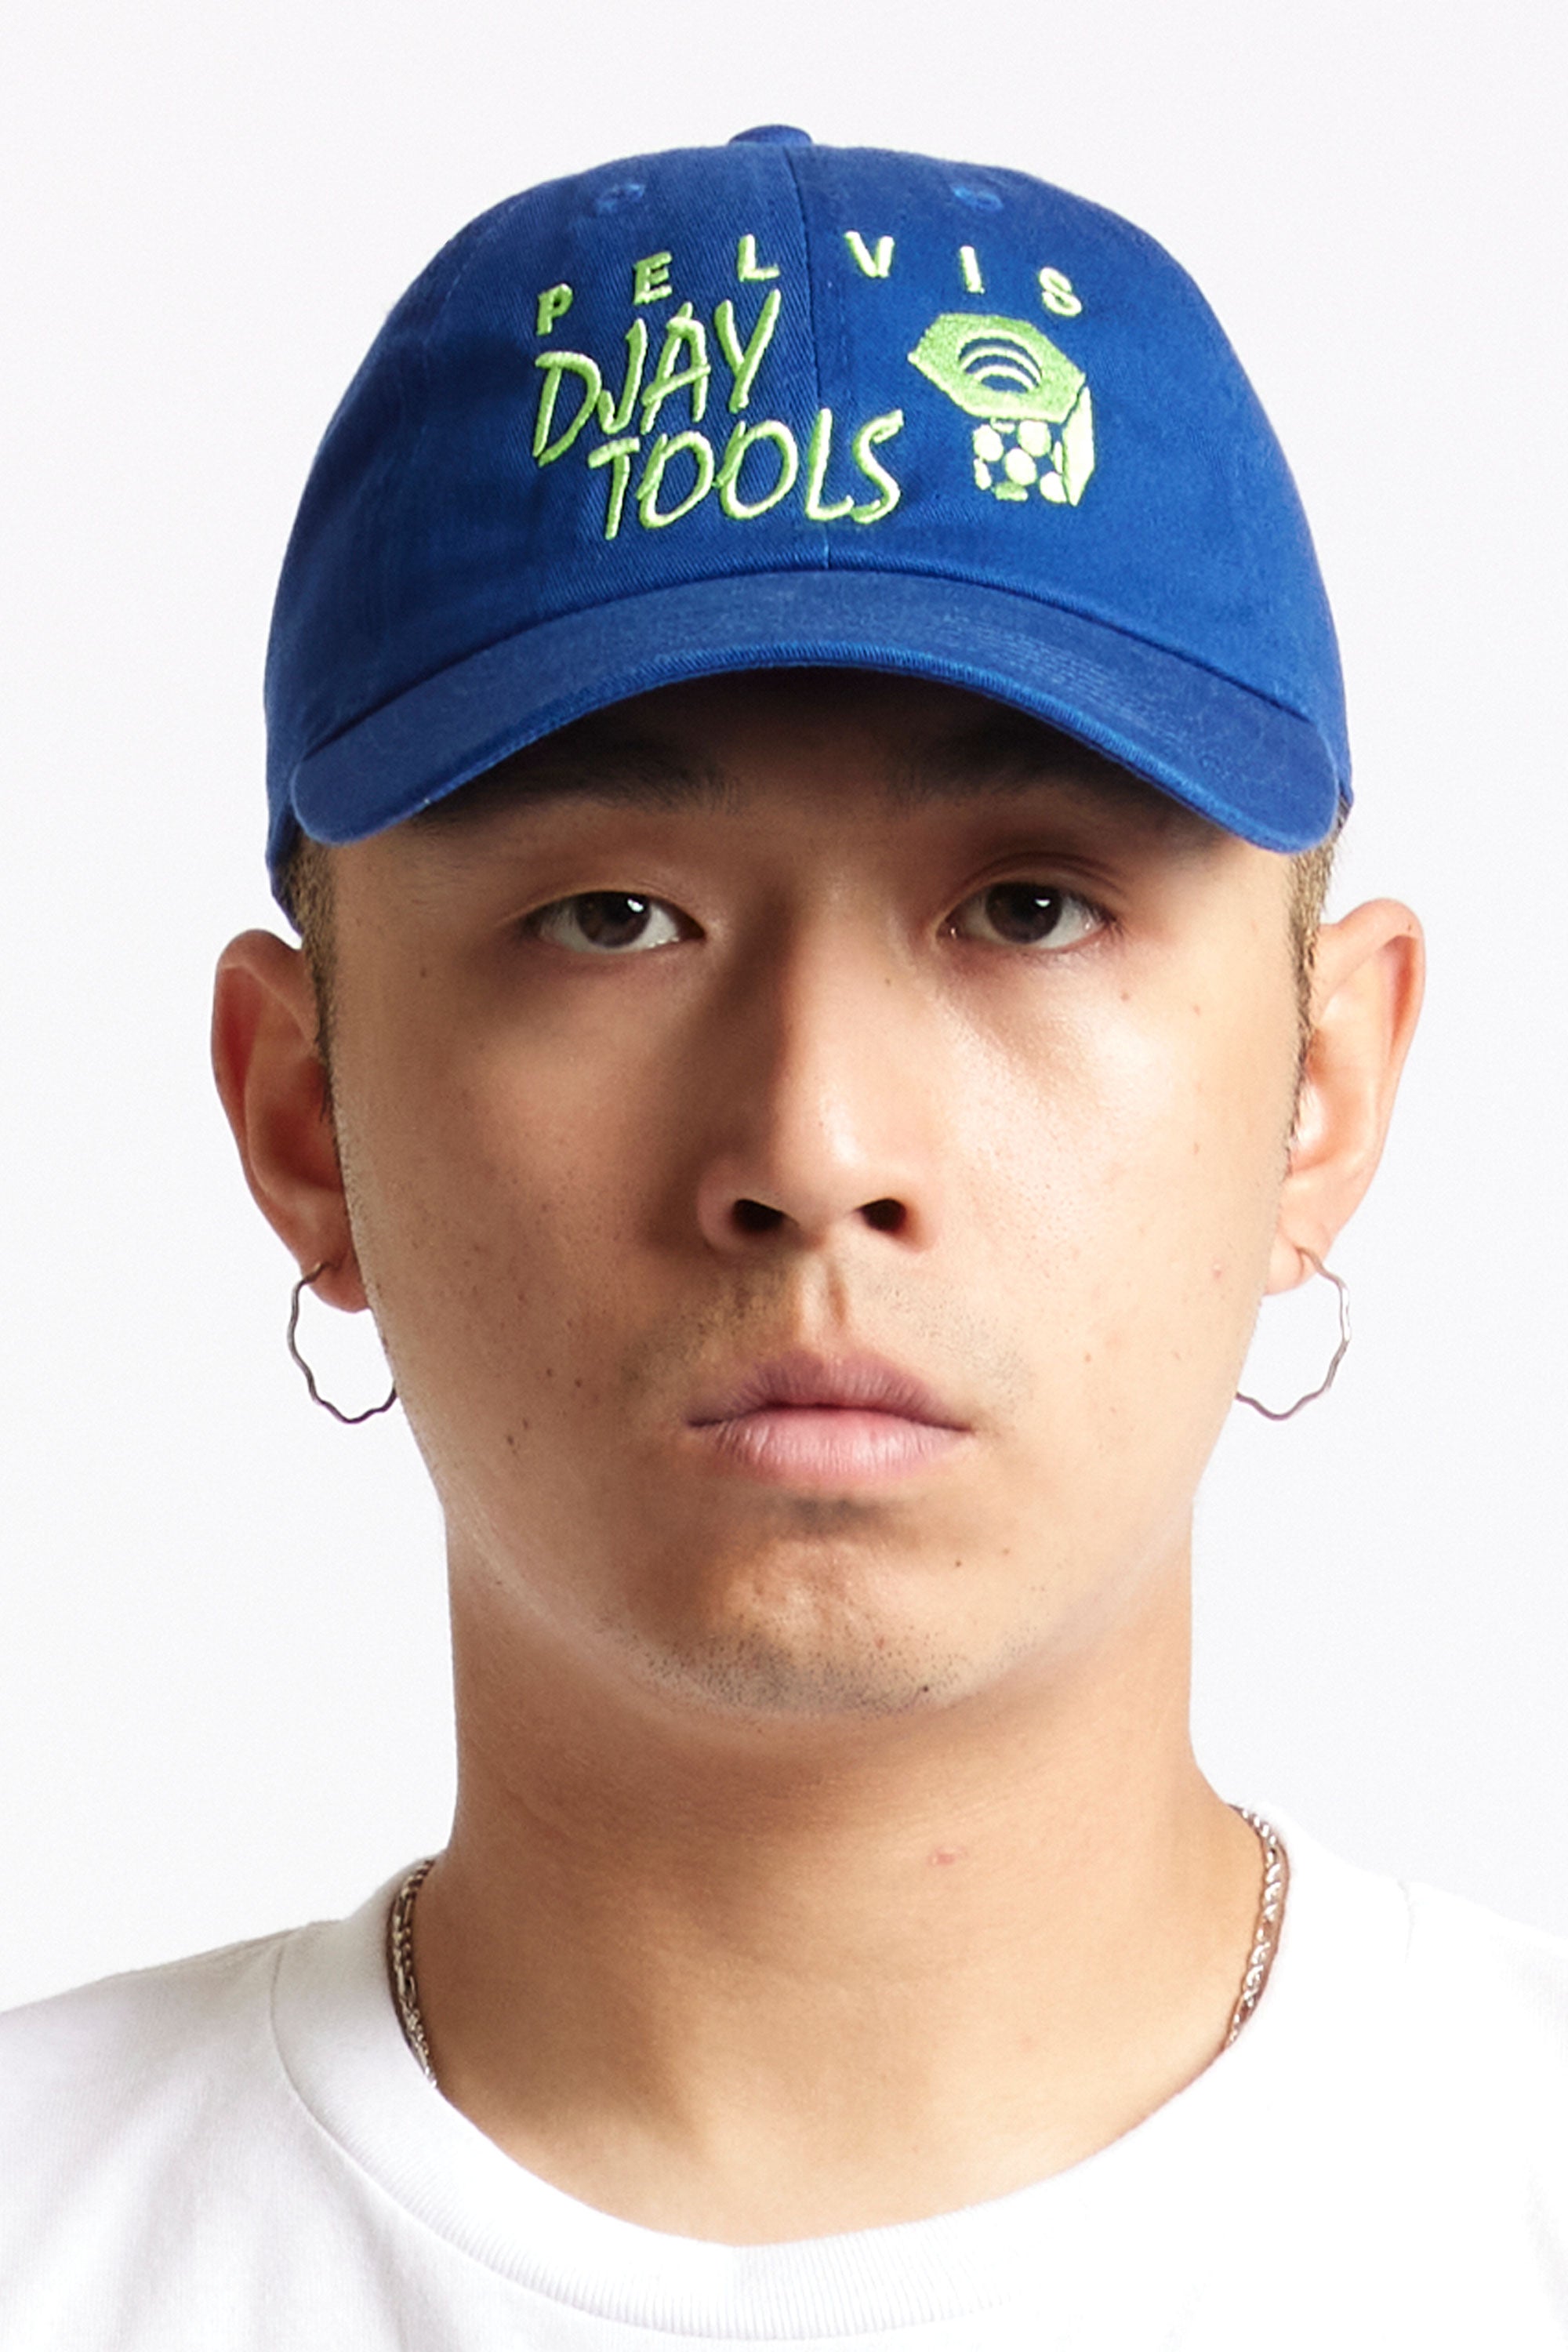 The PELVIS - DJAY TOOLS 3 CAP  available online with global shipping, and in PAM Stores Melbourne and Sydney.